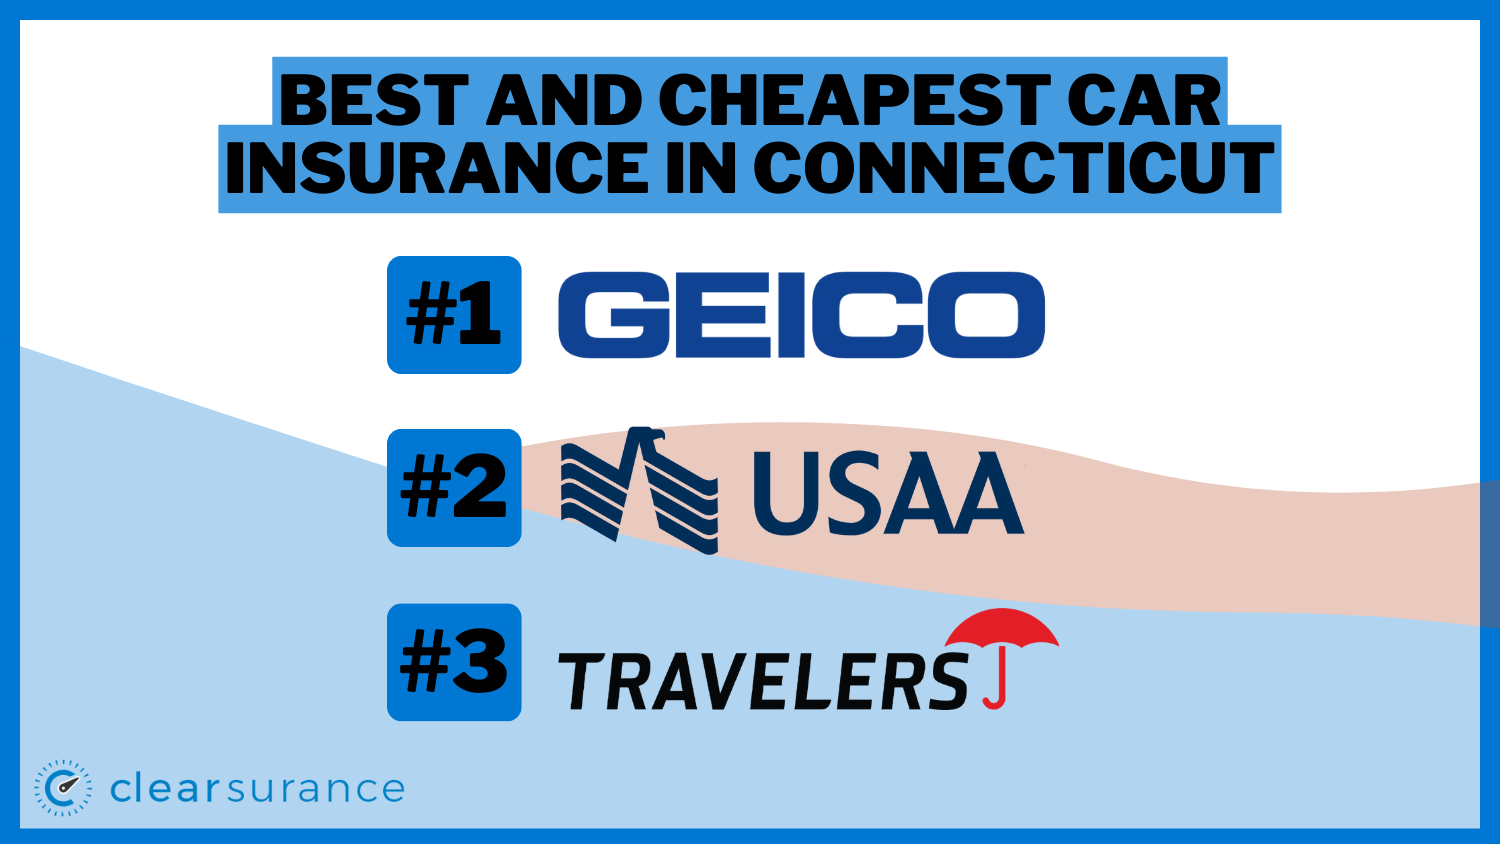 Best and Cheapest Car Insurance in Connecticut